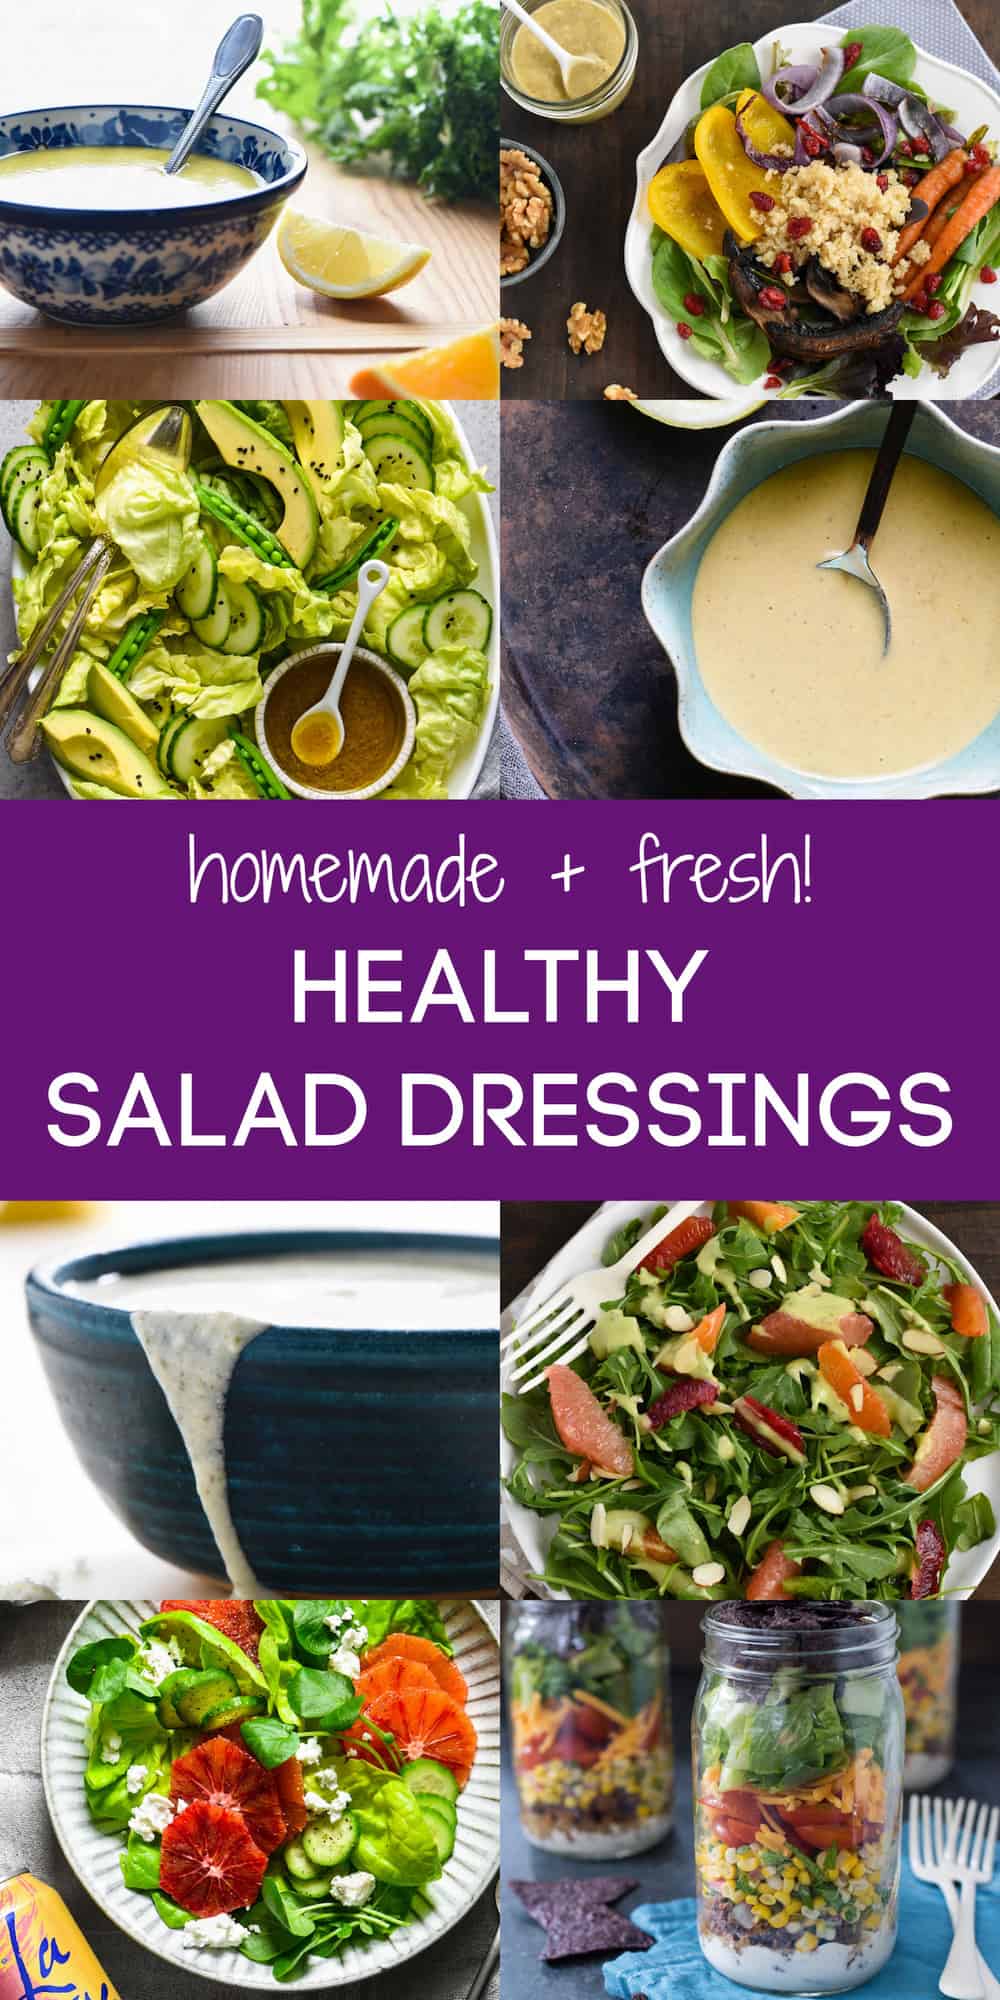 Collage of eight healthy salad dressings and salads with overlay: homemade + fresh HEALTHY SALAD DRESSINGS.